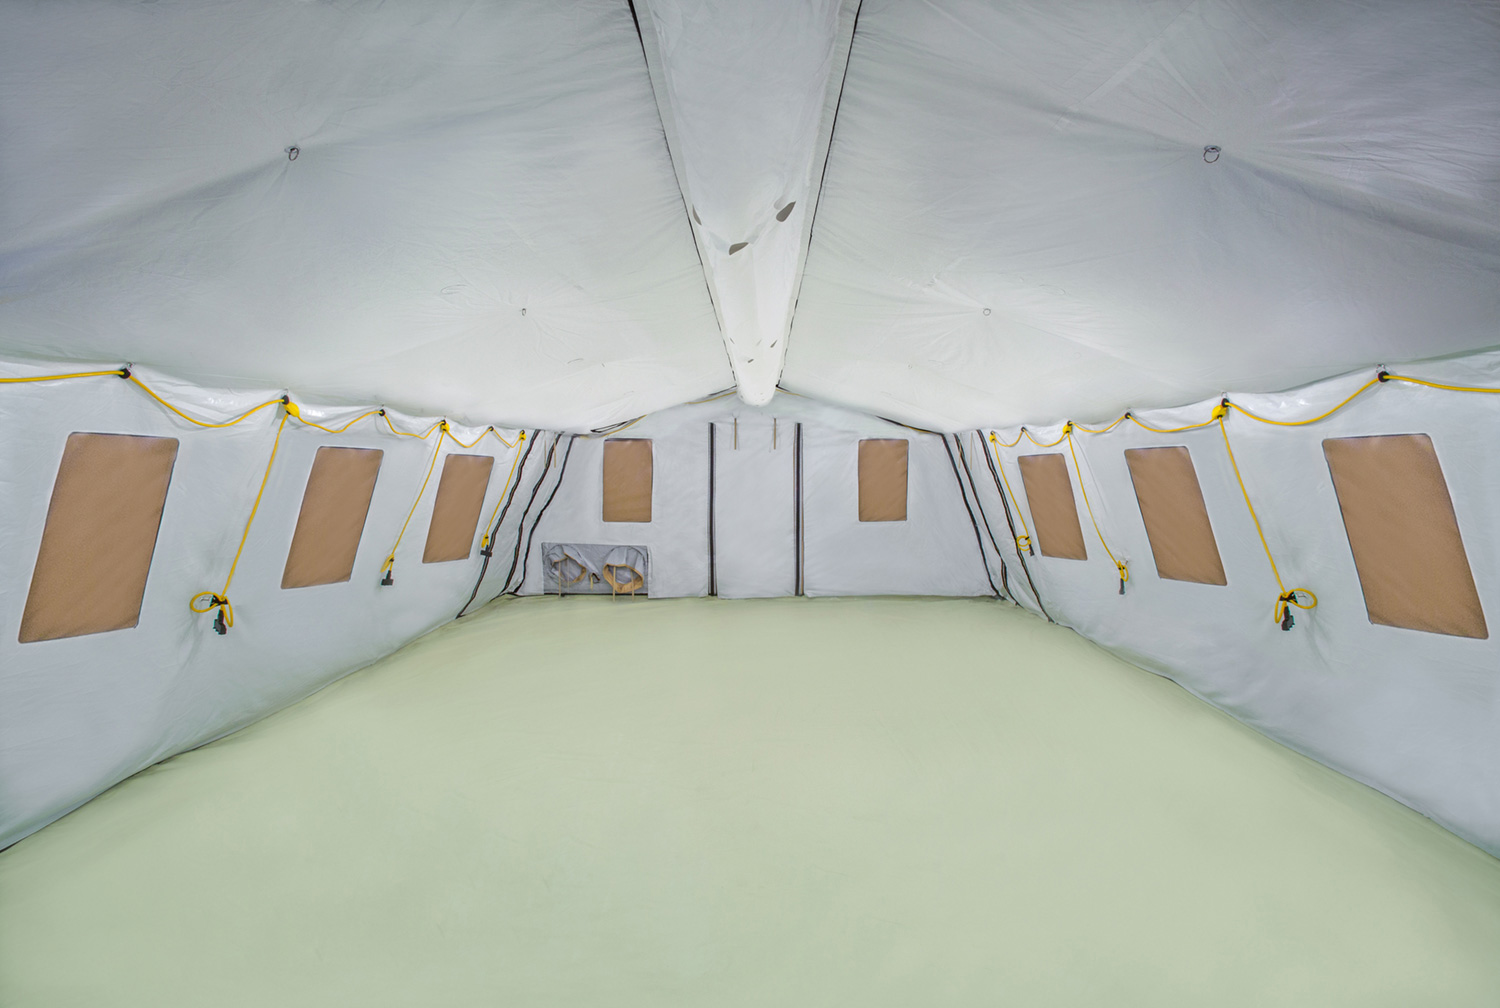 CAMSS 20TAC32 Rapid Deployment Military Shelter with 3 Windows, 2 Entry Covers, and Without Lights